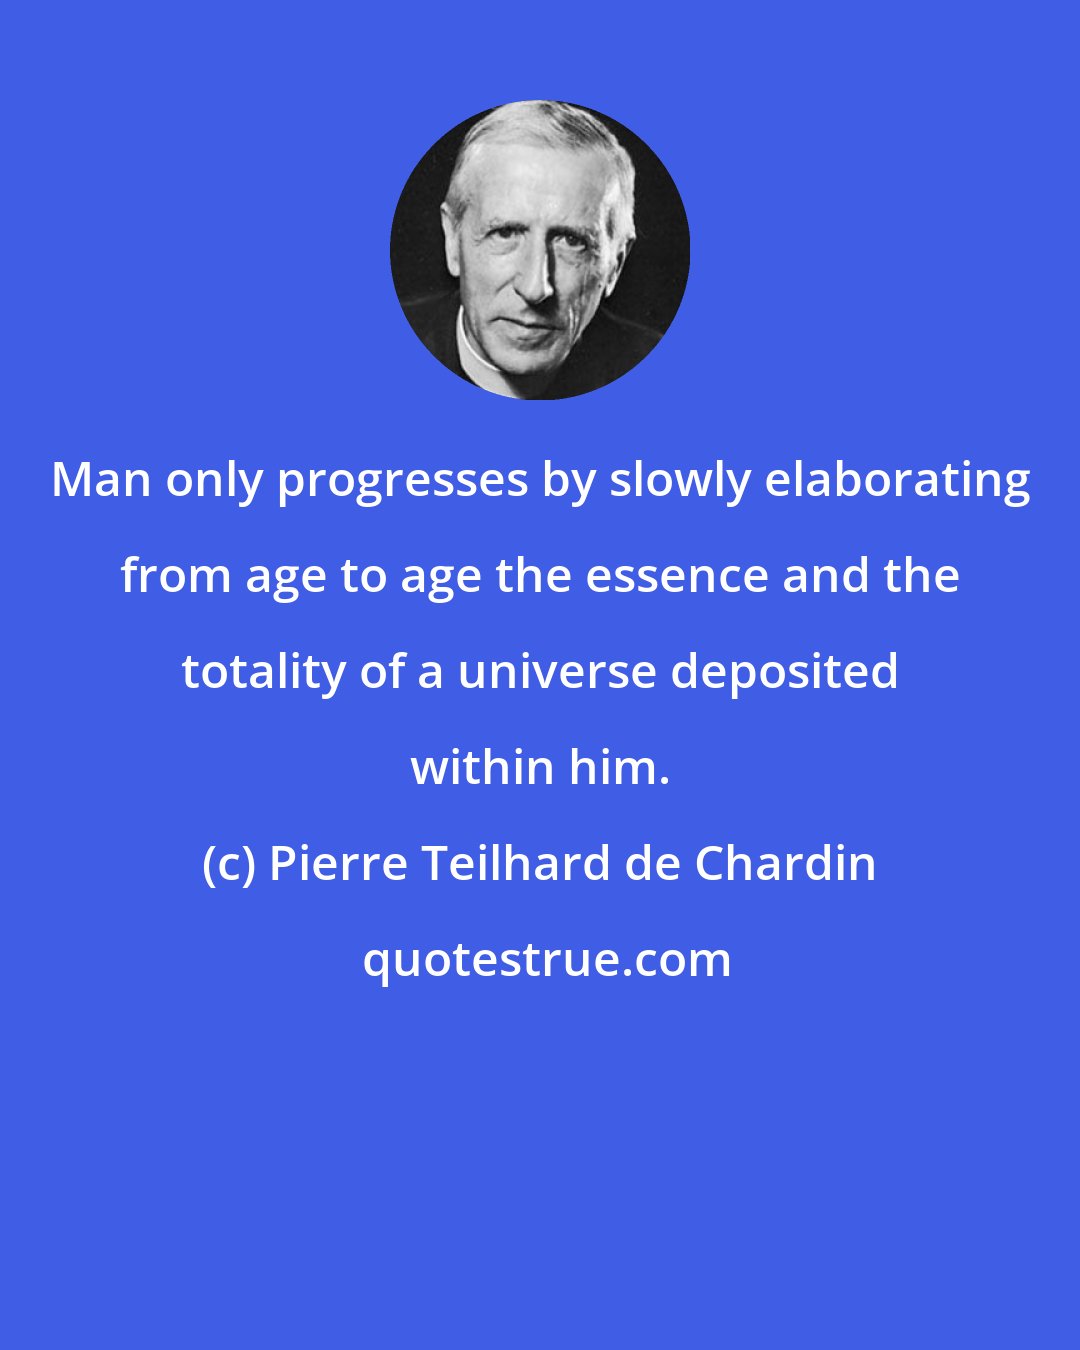 Pierre Teilhard de Chardin: Man only progresses by slowly elaborating from age to age the essence and the totality of a universe deposited within him.